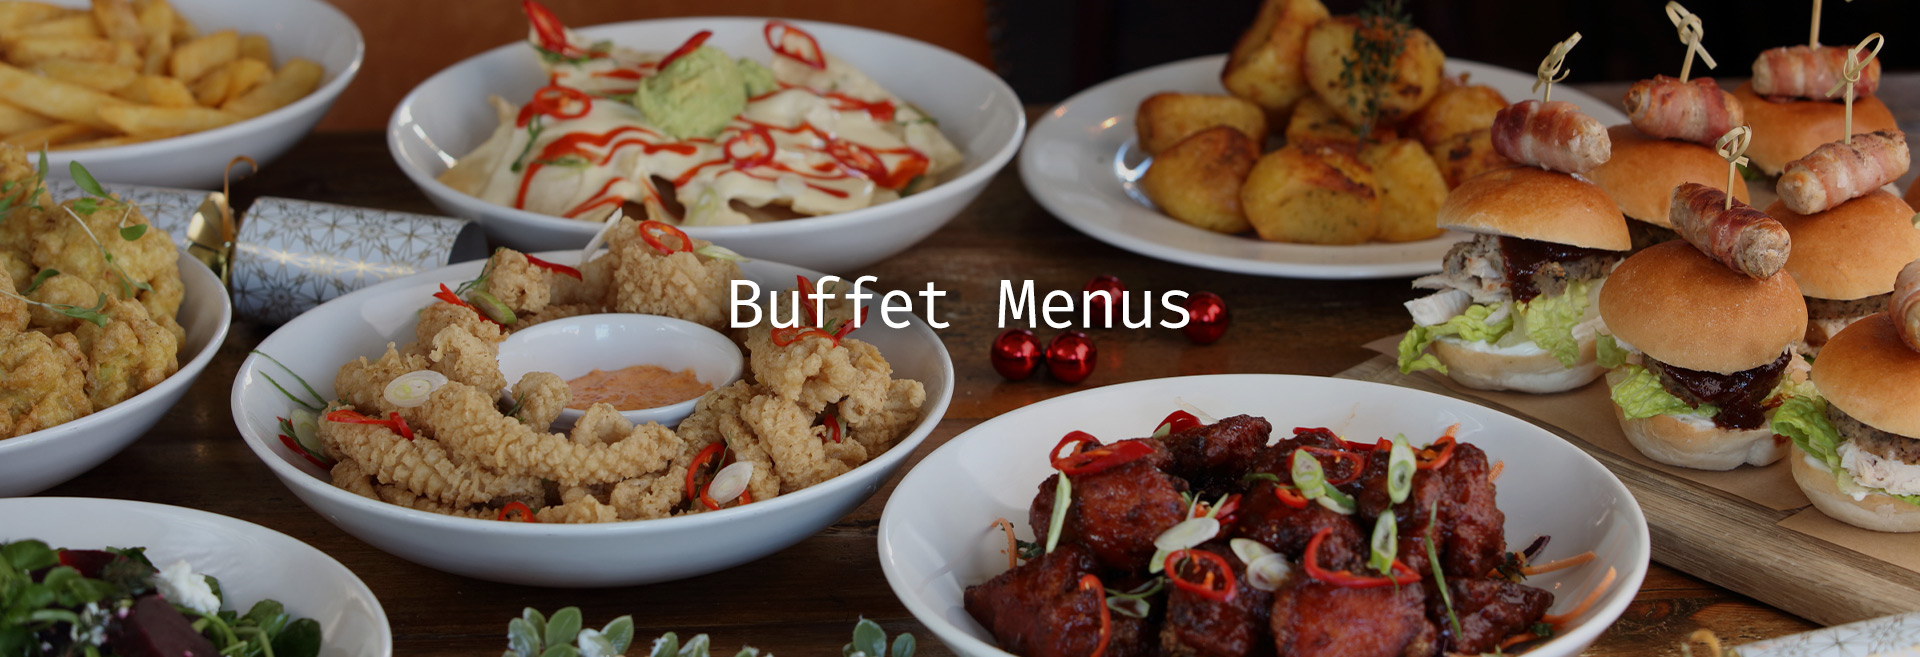 Festive Buffet Menu at Nation of Shopkeepers 